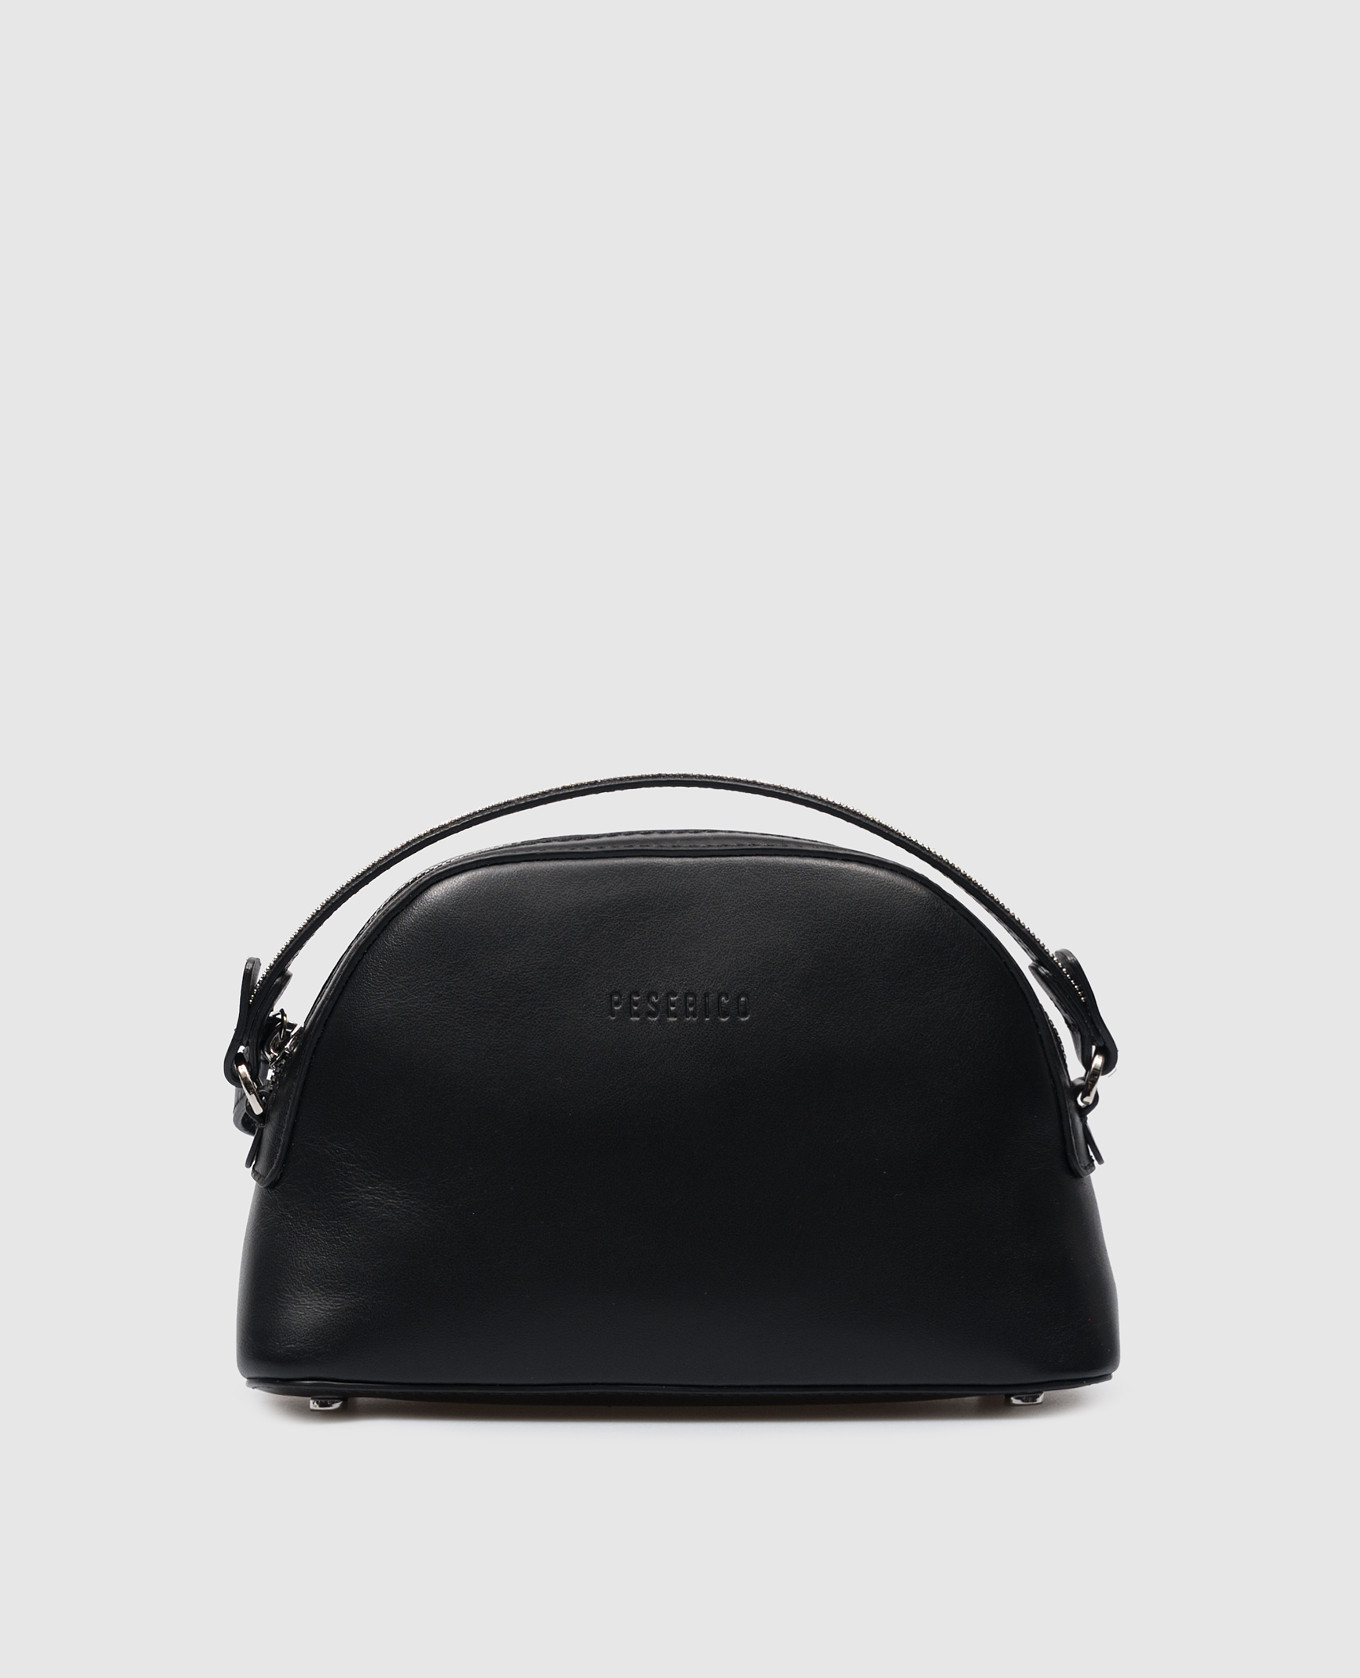 Black leather clutch with monil chain